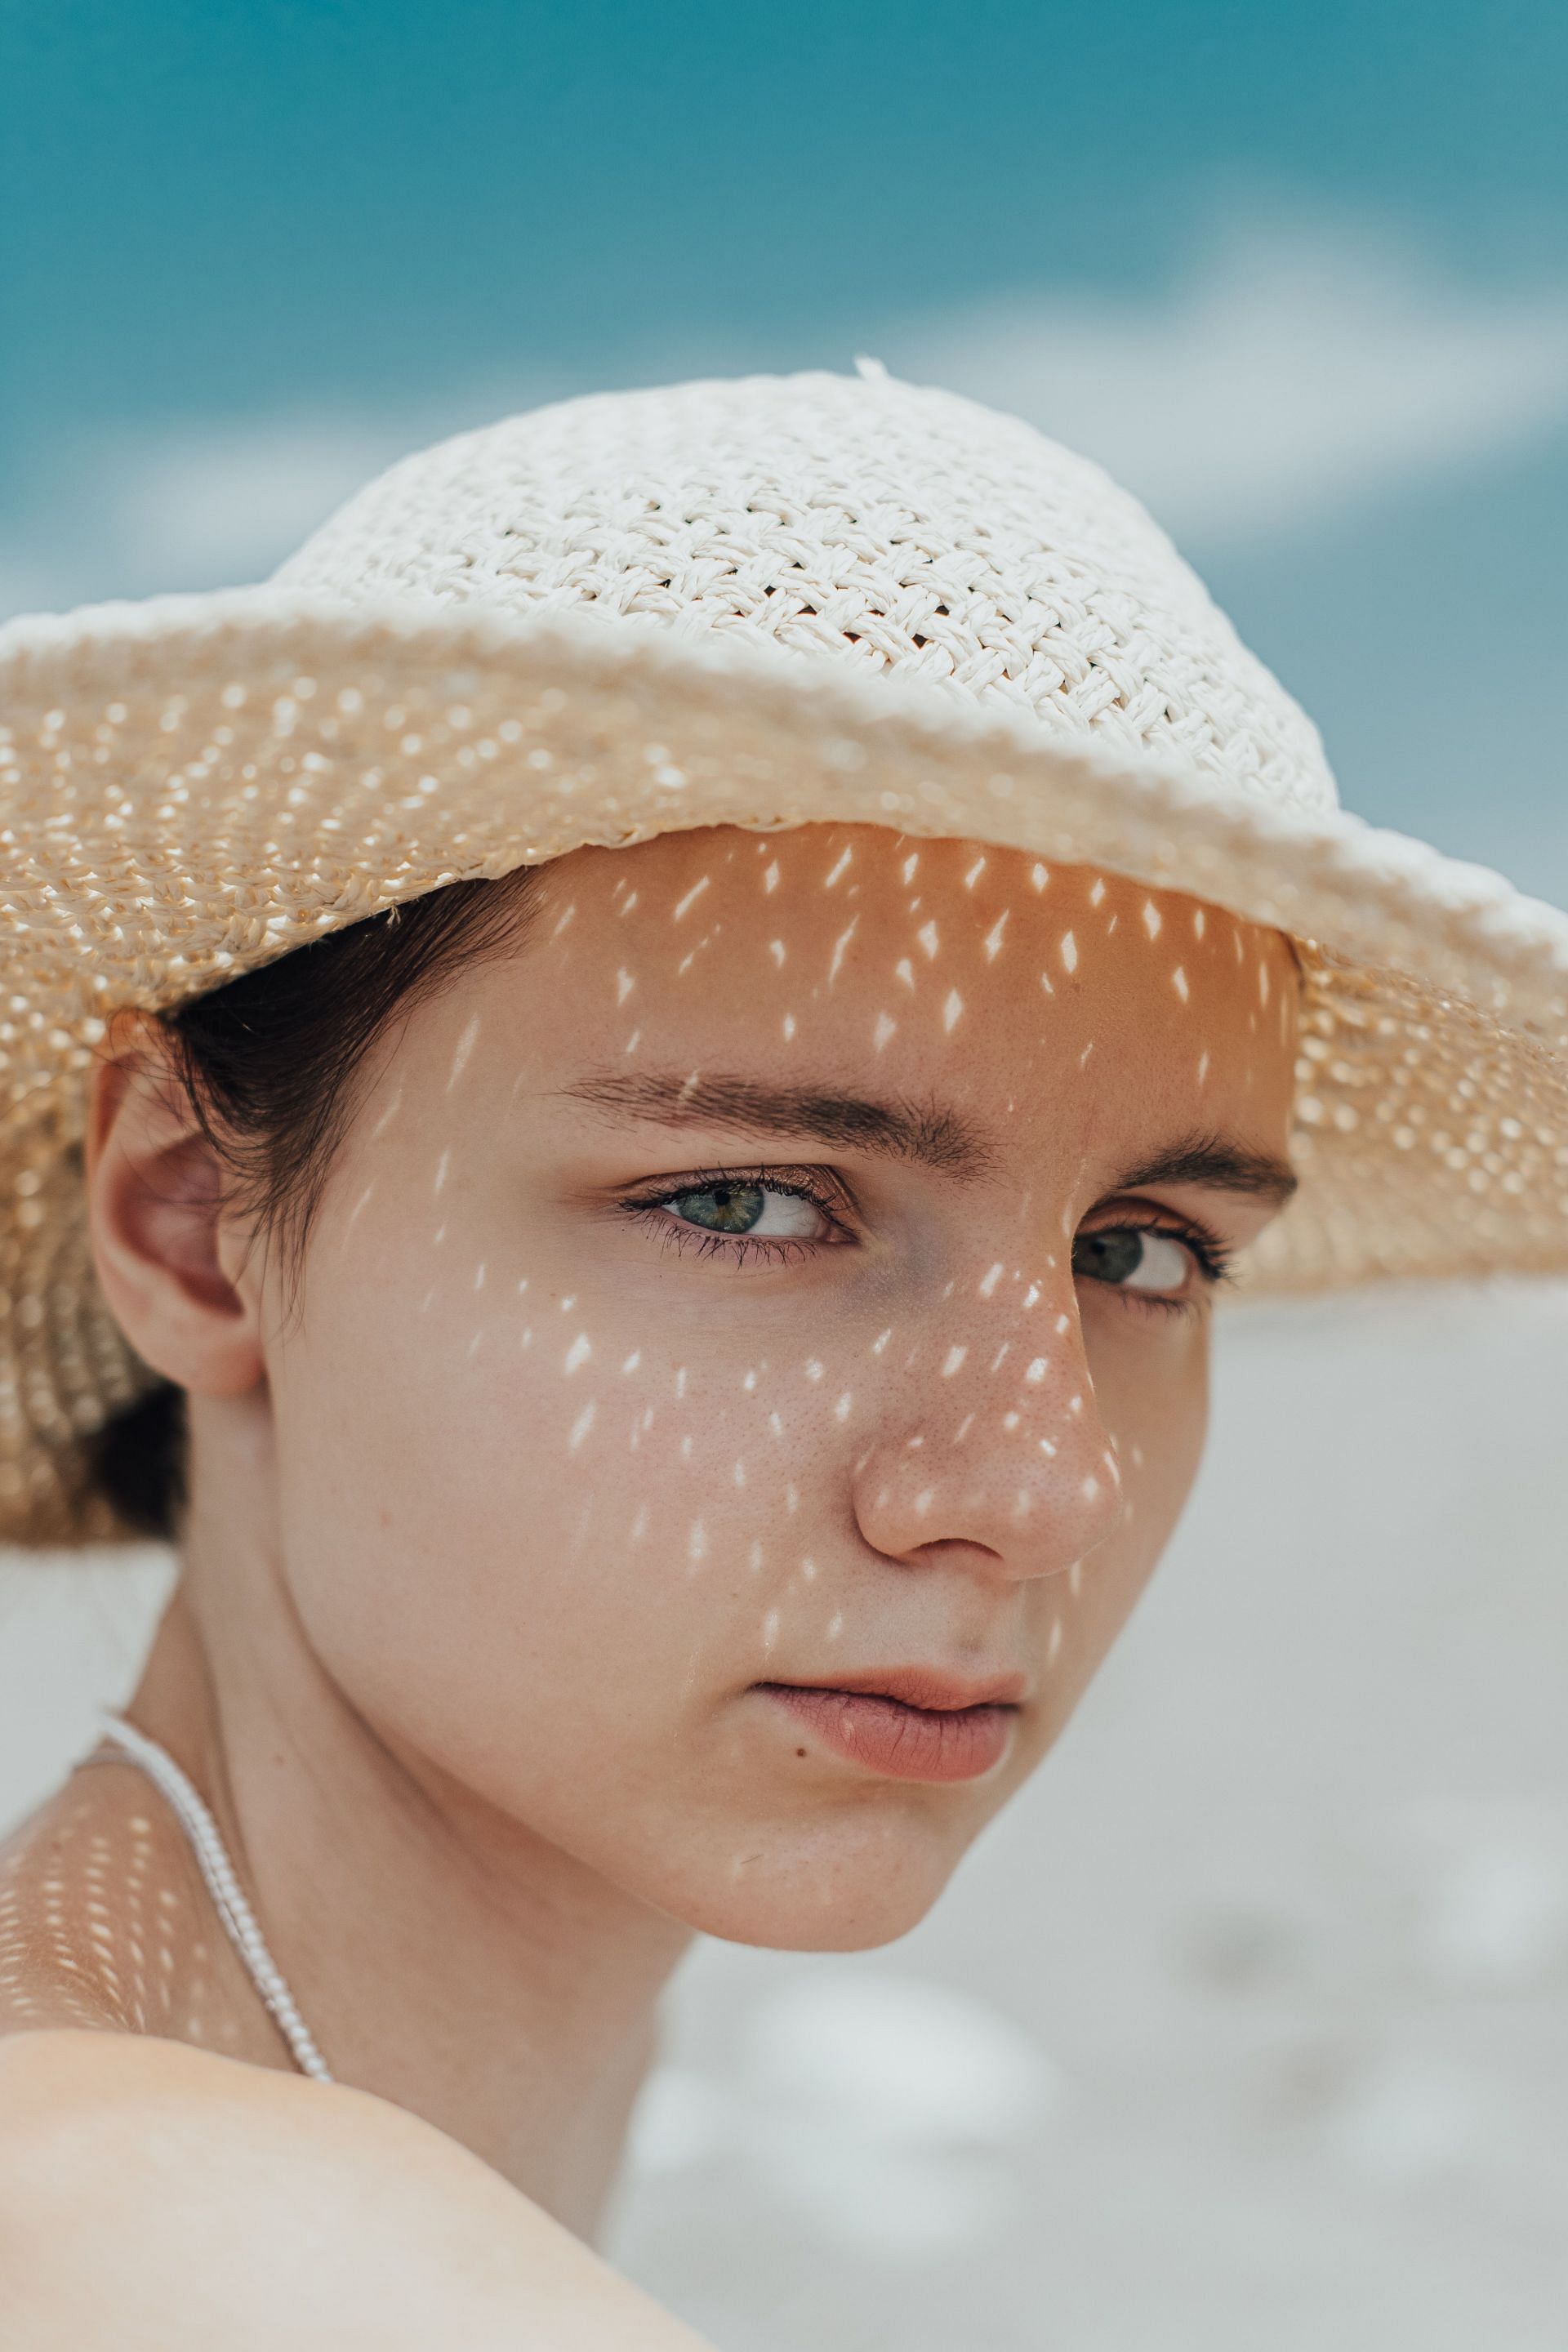 Protect your hair from UV damage with these simple tips (Image via Pexels)